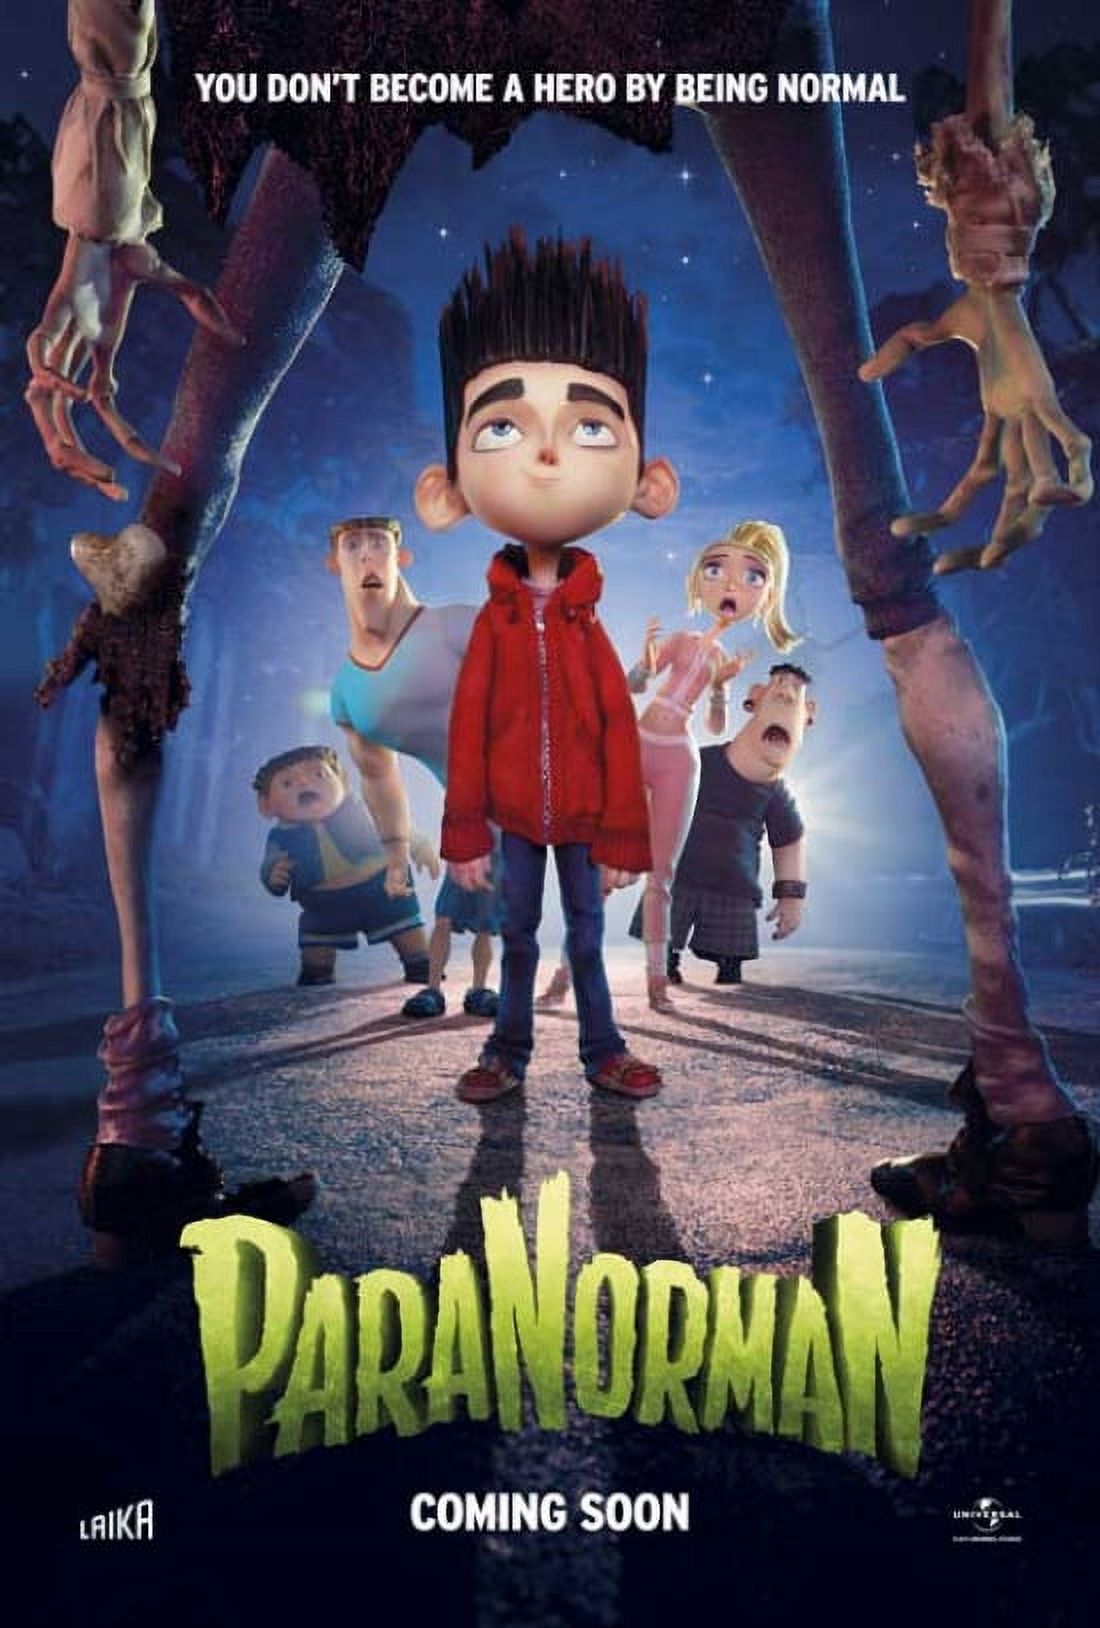 ParaNorman Movie Poster (11 x 17) - image 1 of 1